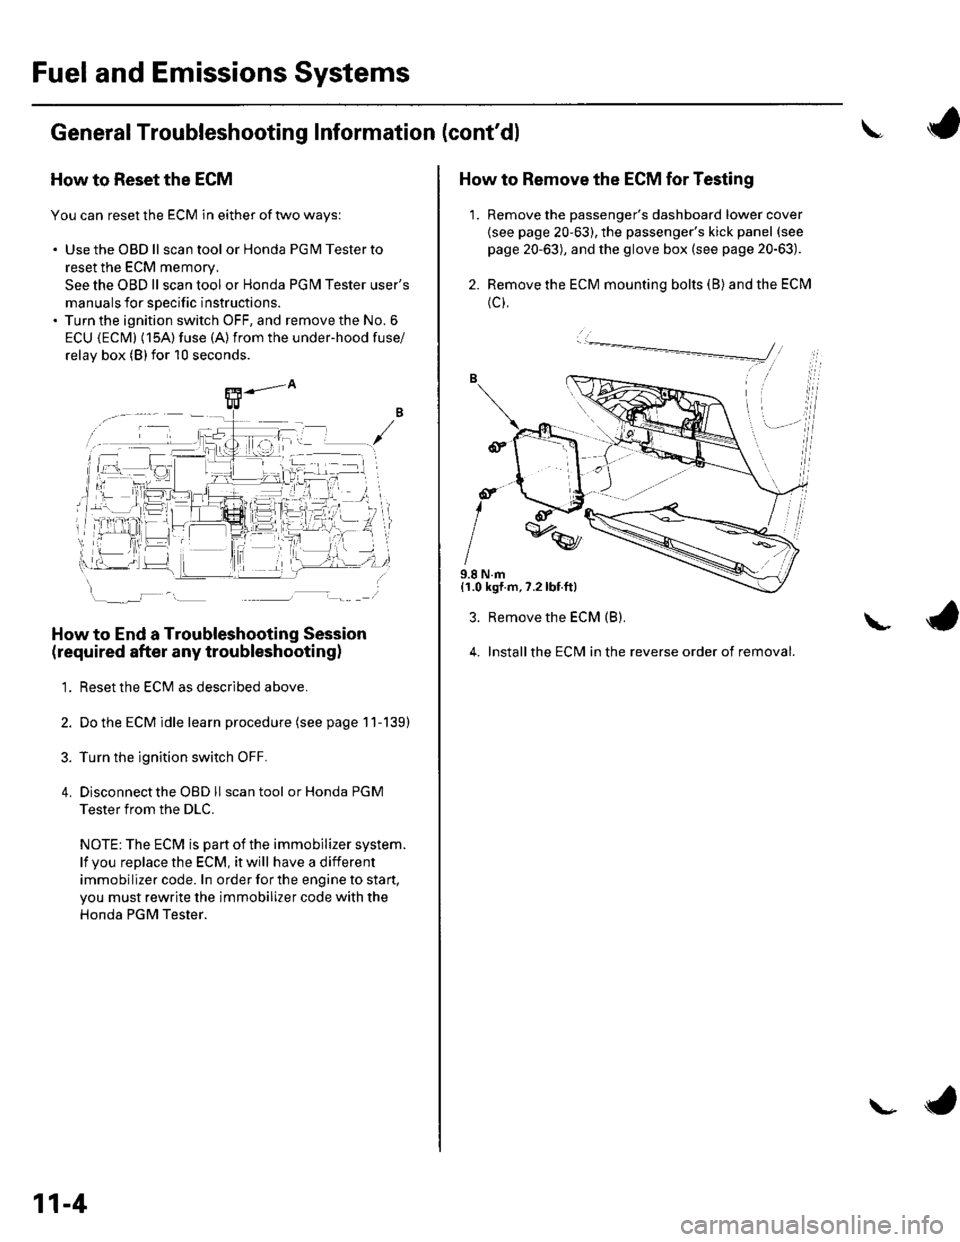 HONDA CIVIC 2003 7.G User Guide Fuel and Emissions Systems
General Troubleshooting Information (contdl
How to Reset the ECM
You can reset the ECM in either of two ways:
. Use the OBD ll scantool or Honda PGMTesterto
reset the ECM m